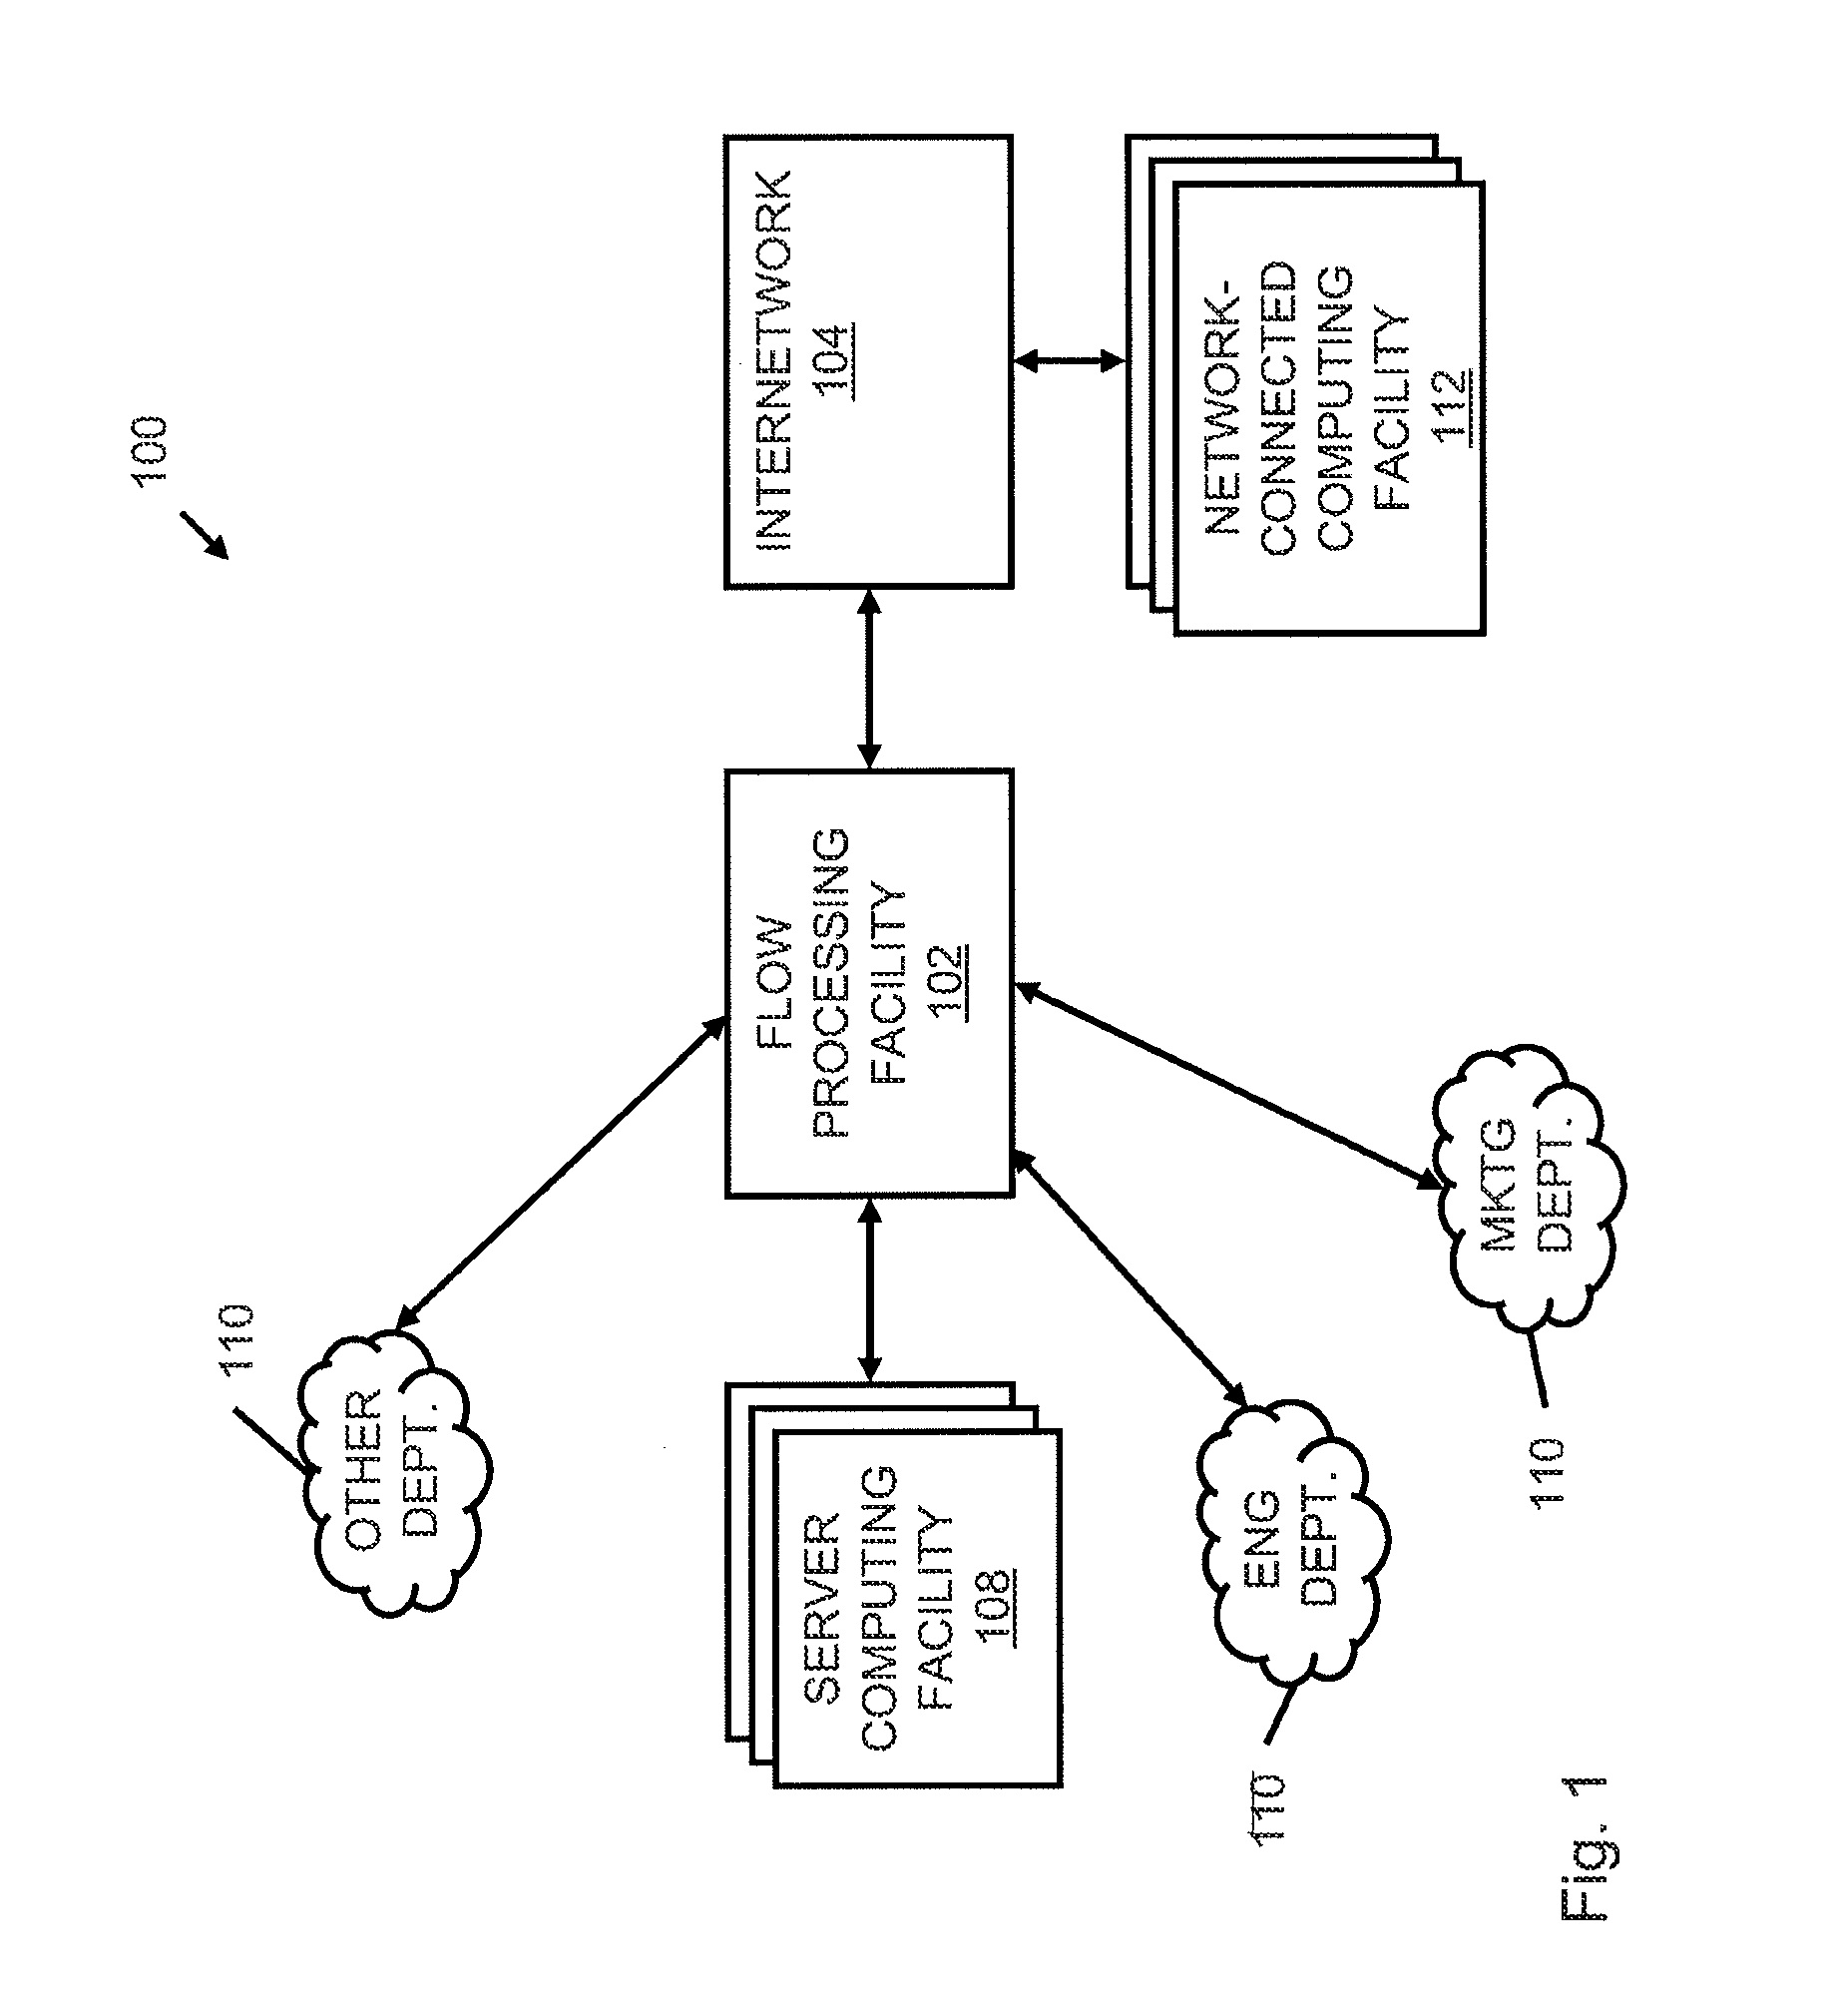 Systems and Methods for Processing Data Flows